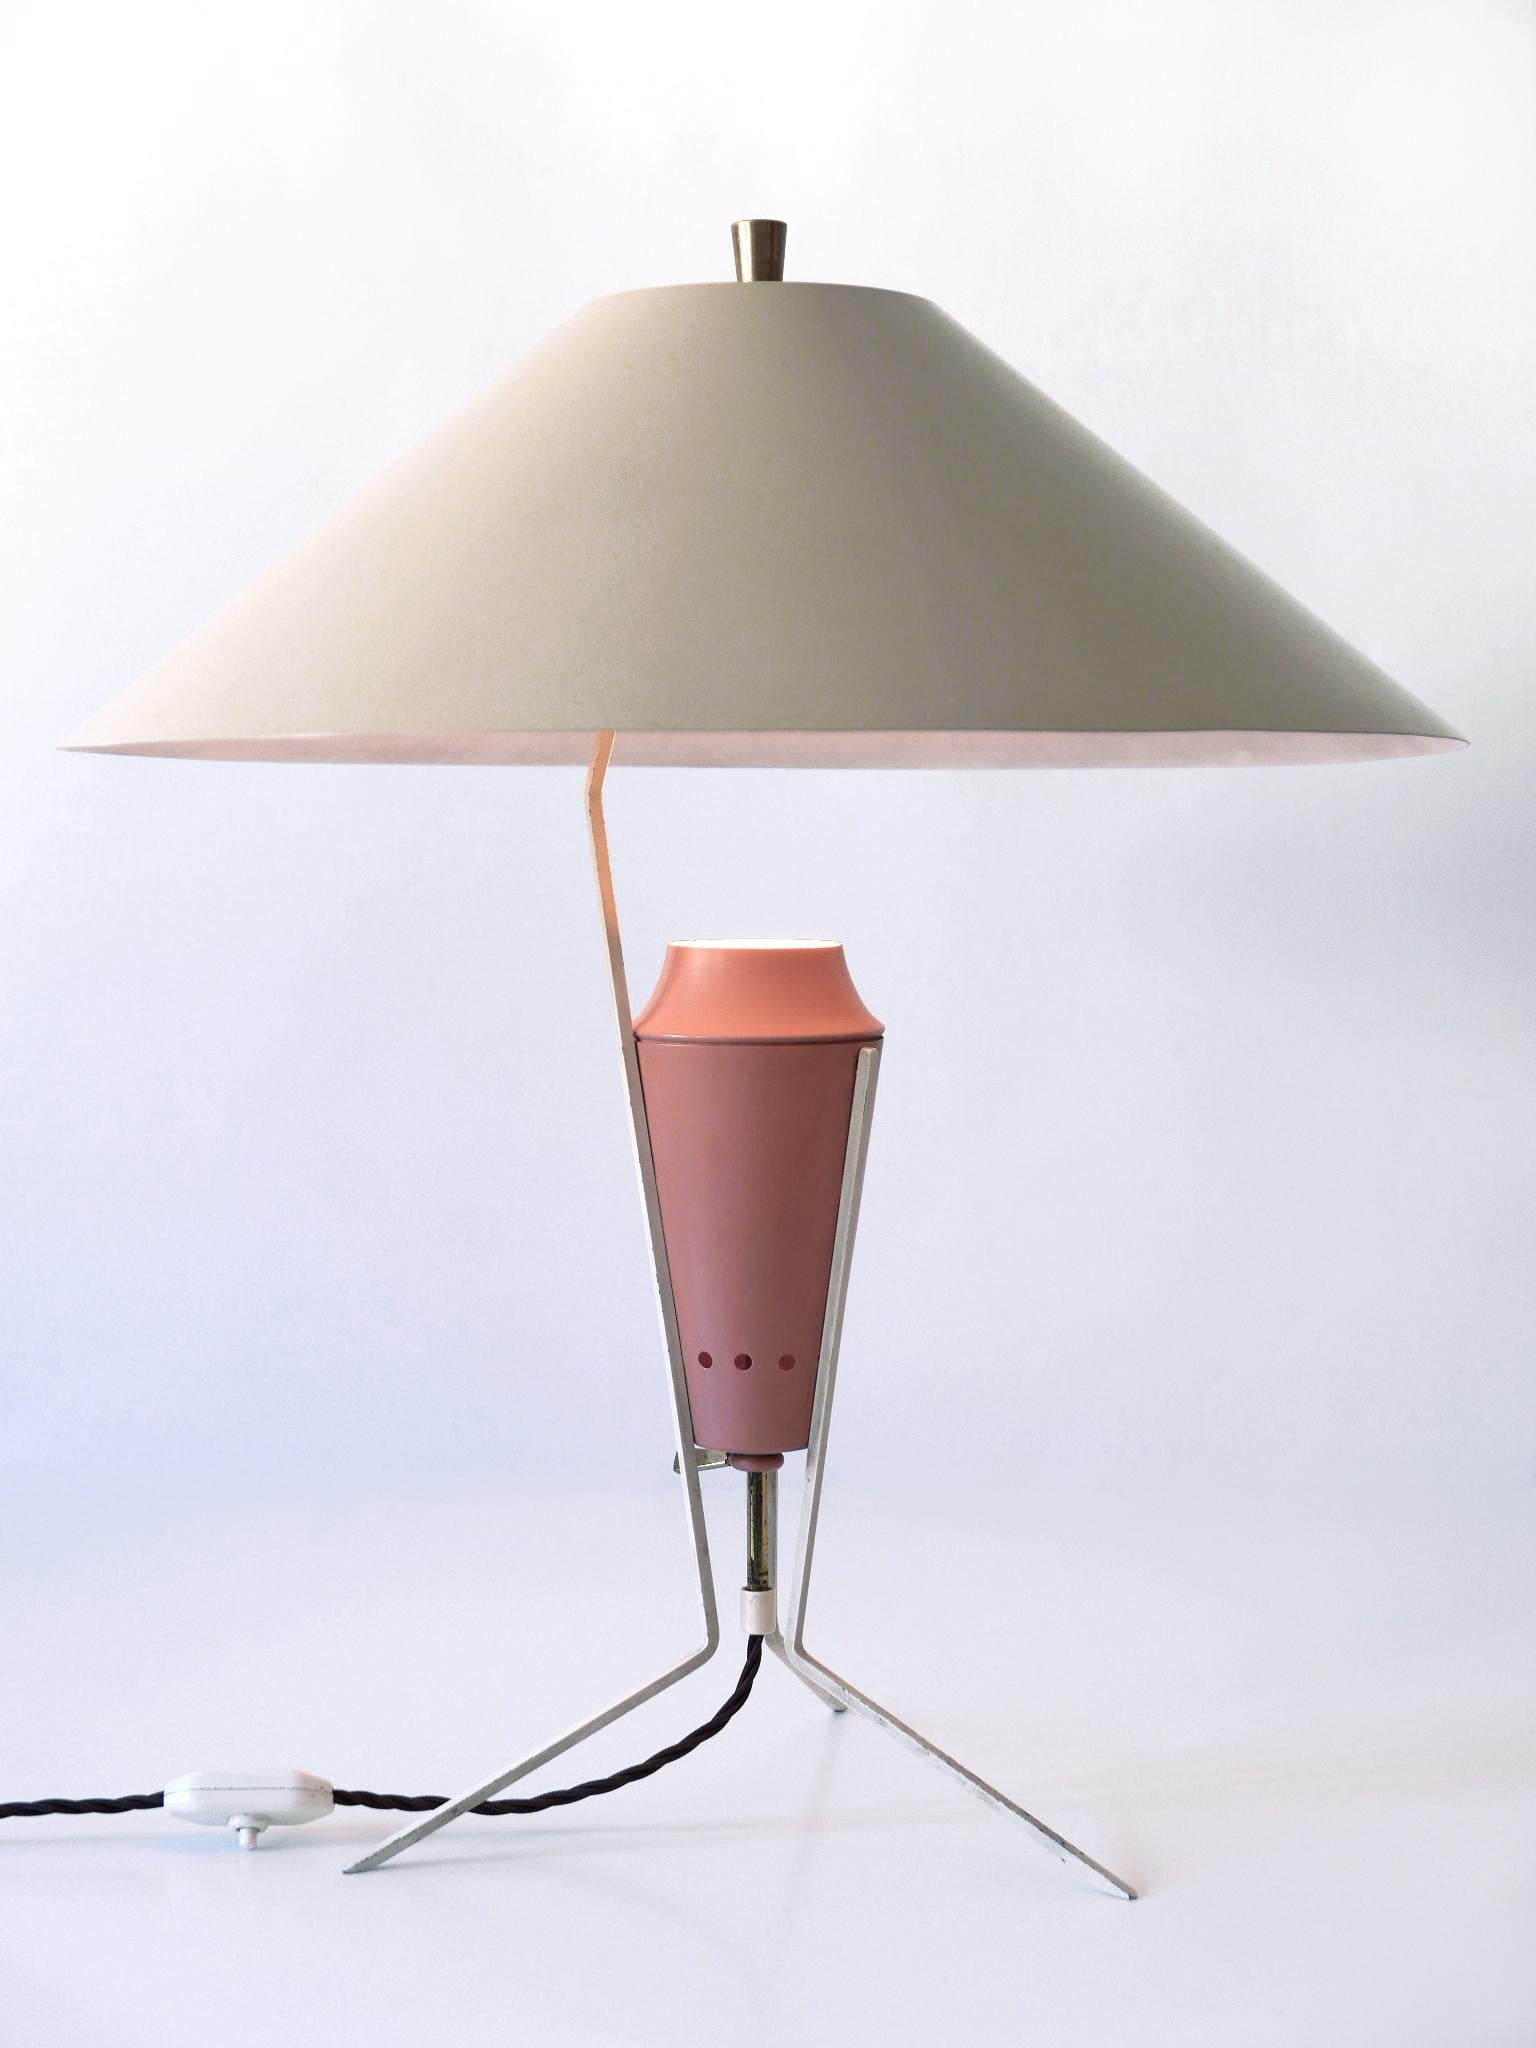 Exceptional Large & Elegant Mid Century Modern Table Lamp Germany 1950s For Sale 3